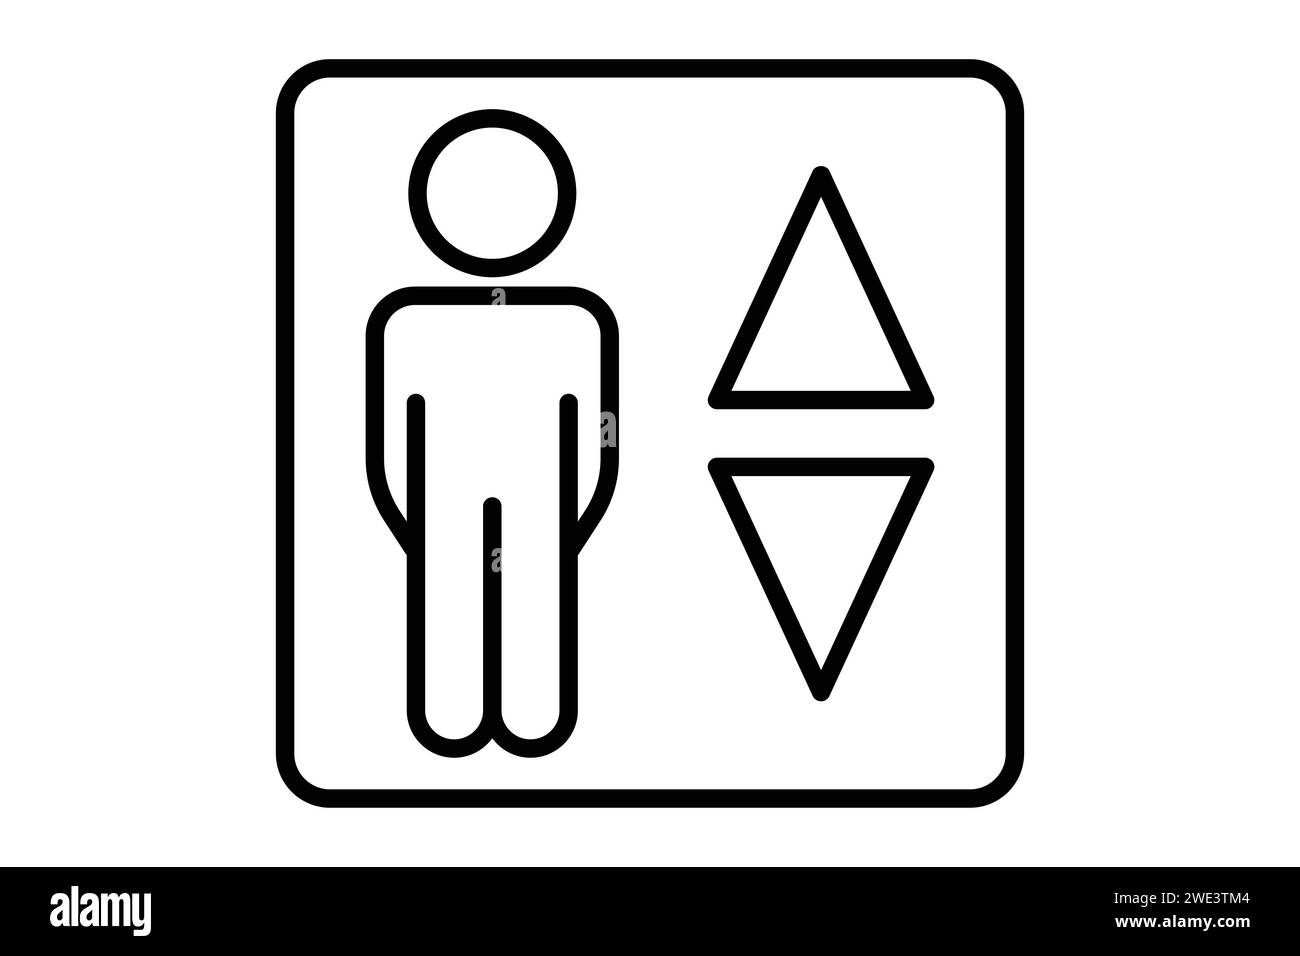 elevator icon. icon related to indoor navigation in public spaces. line icon style. element illustration Stock Vector